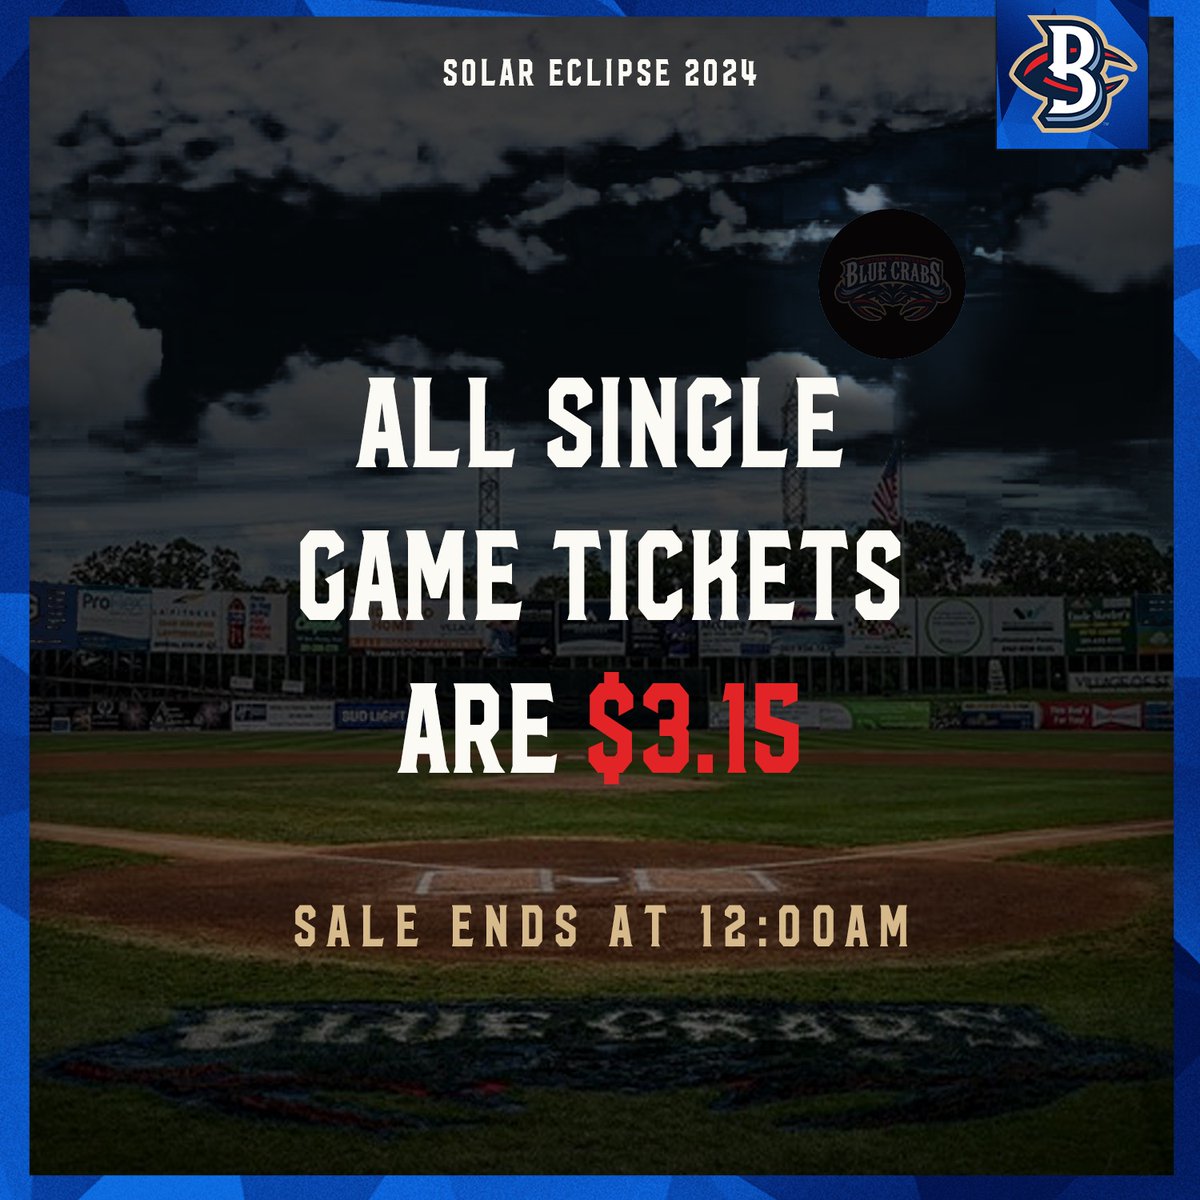 ‼FLASH SALE‼

In honor of today's Solar Eclipse, all single game tickets are $3.15! Sale ends at midnight!

Purchase tickets here: shorturl.at/kFGV1

#RingChasing💍